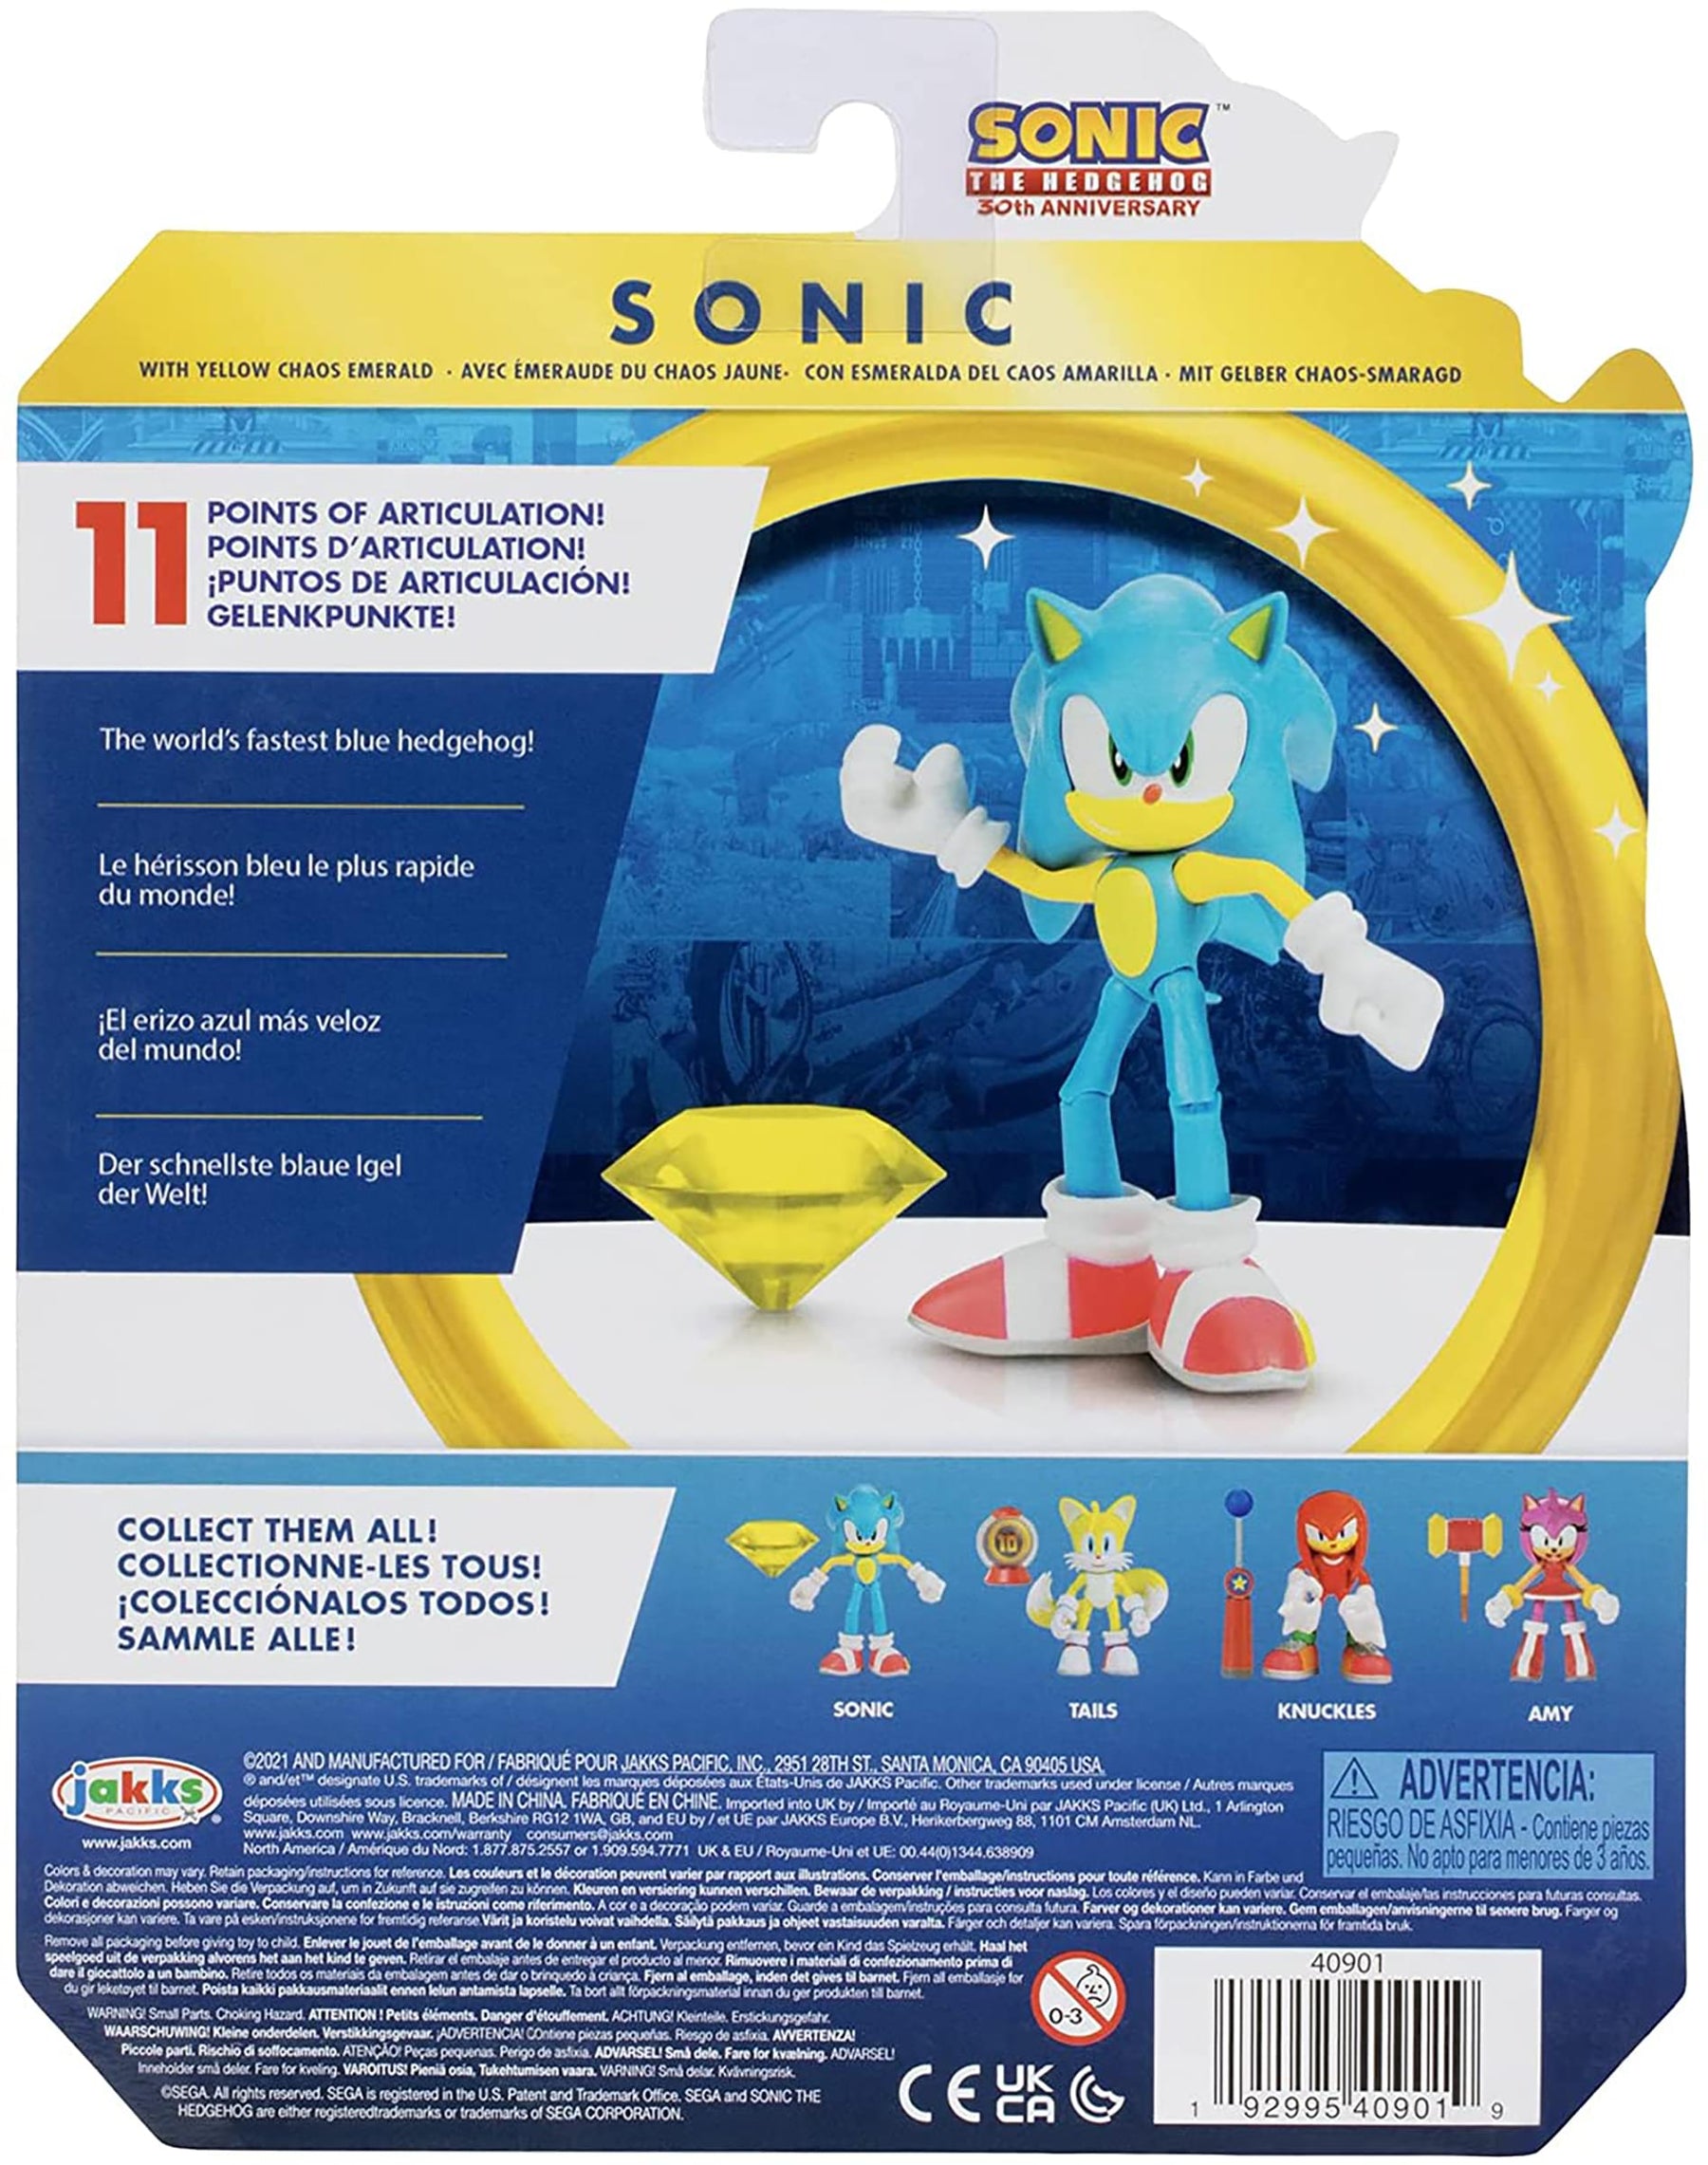 Sonic the Hedgehog 4 Inch Figure | Modern Sonic with Yellow Chaos Emerald